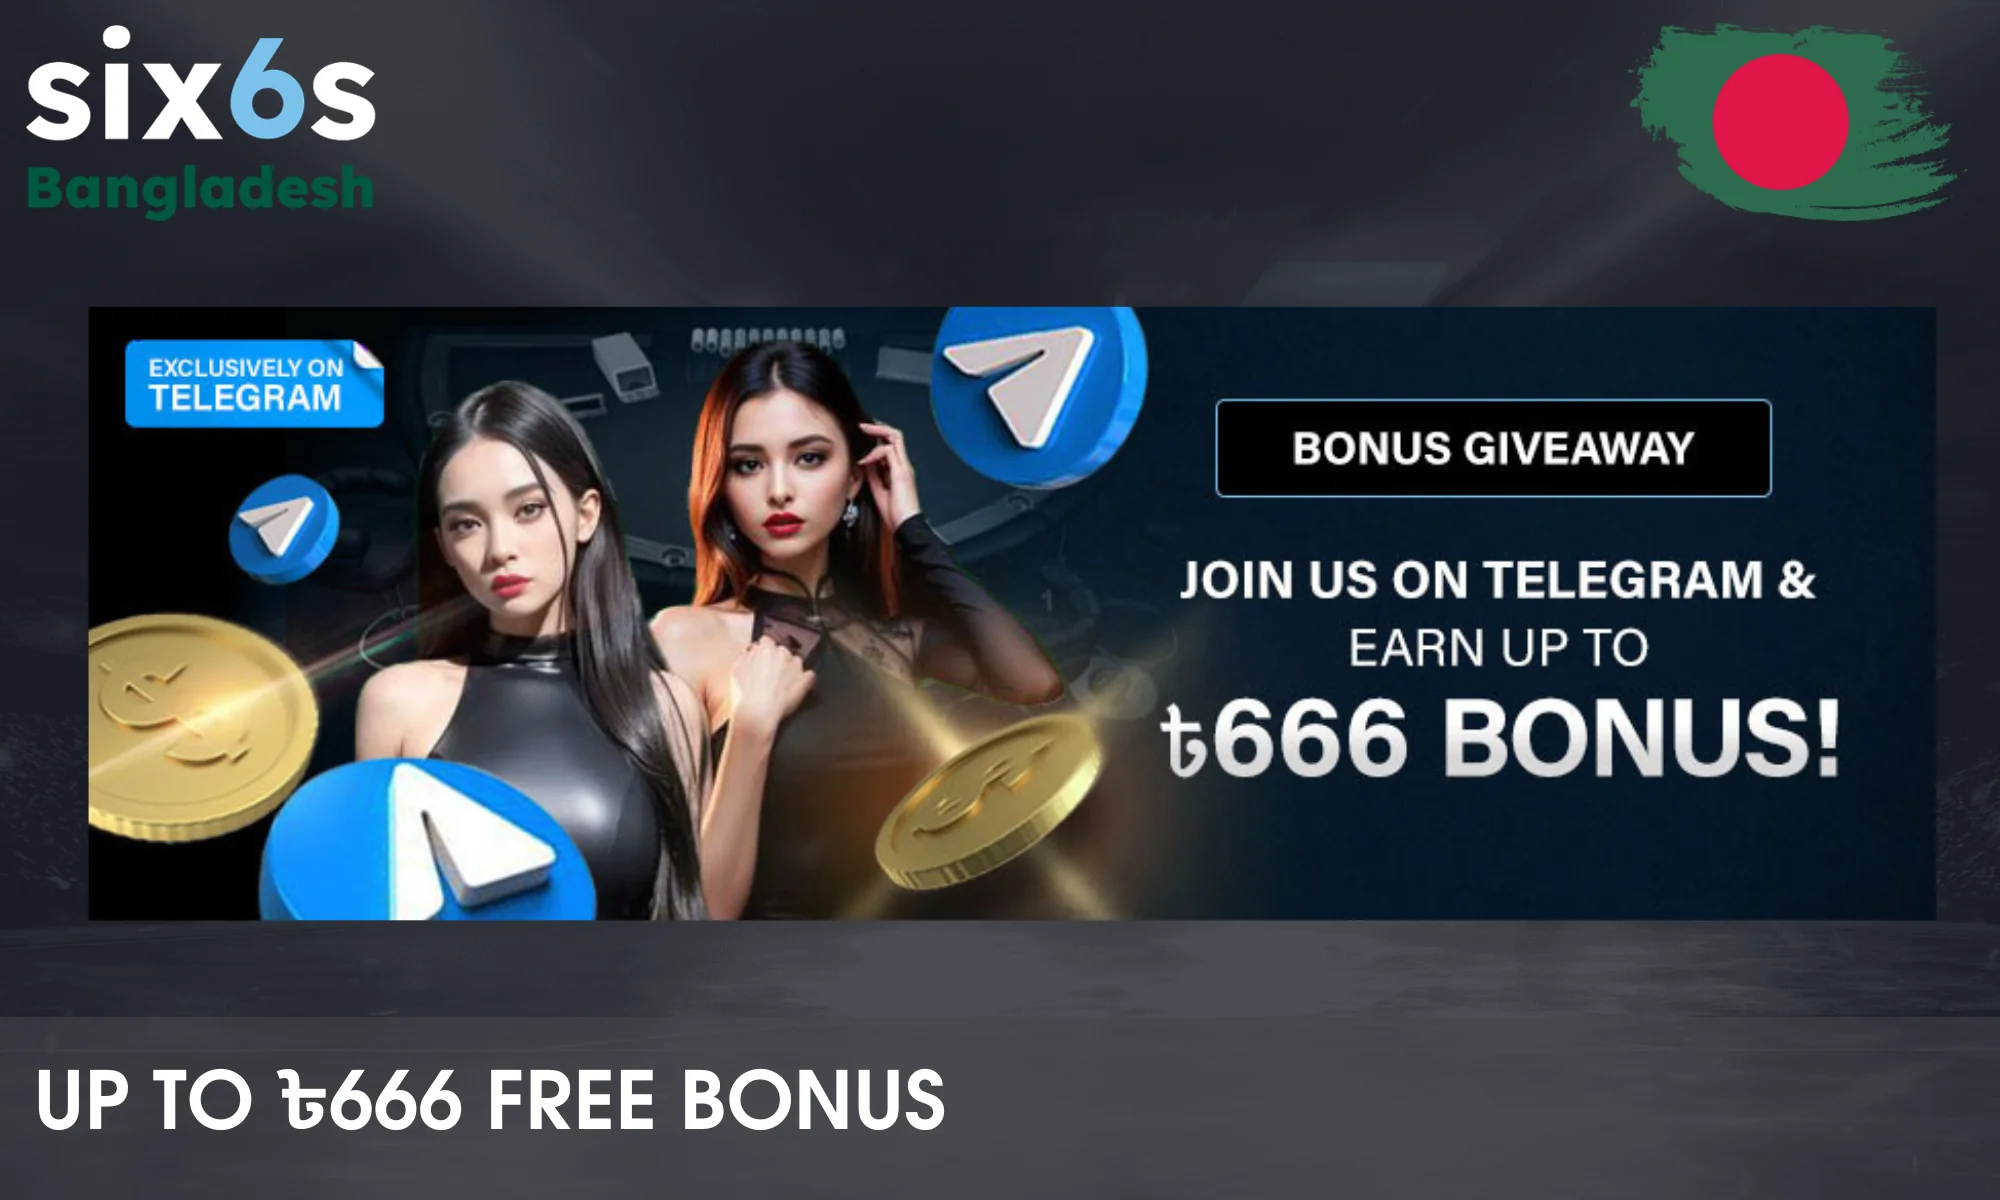 Drawing of ৳666 among telegram users who have added Six6s channel